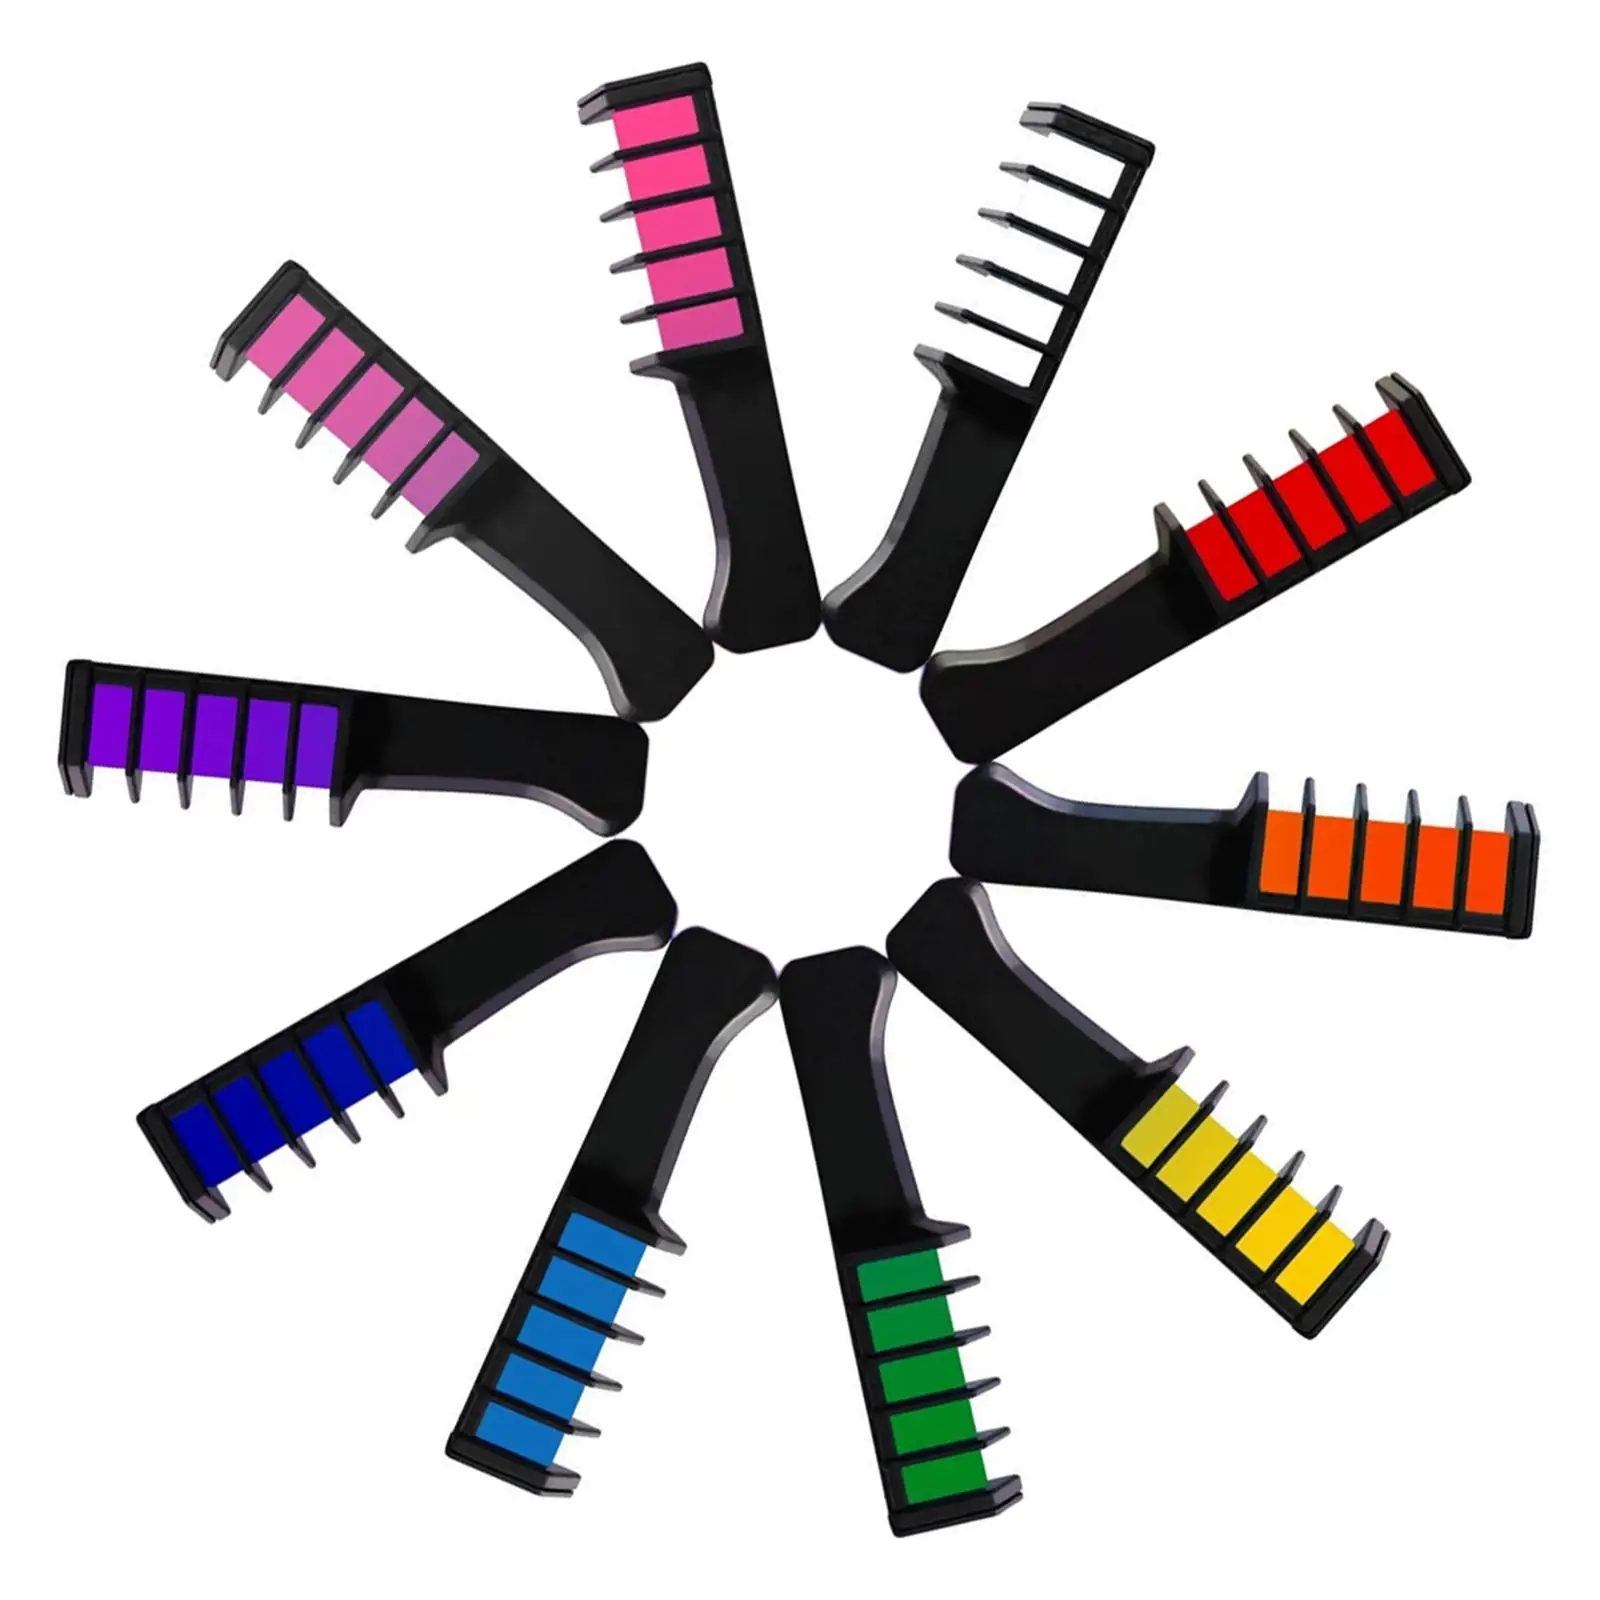 10Pcs Multicolored Temporary   Colors  With Brush  Comb for Girls, Party, Cosplay